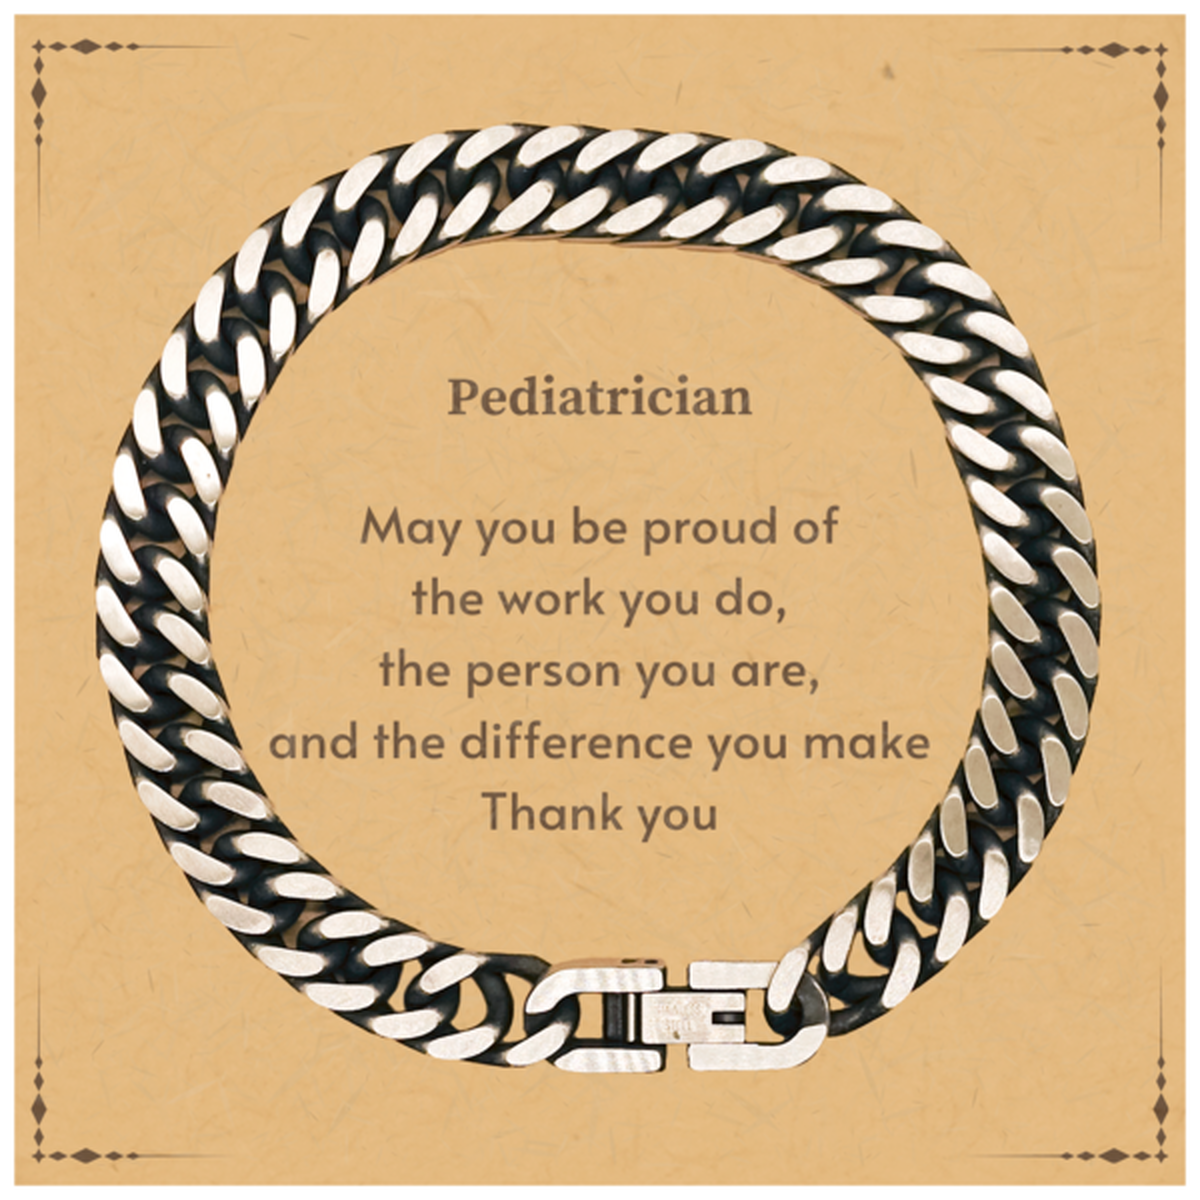 Heartwarming Cuban Link Chain Bracelet Retirement Coworkers Gifts for Pediatrician, Pediatrician May You be proud of the work you do, the person you are Gifts for Boss Men Women Friends